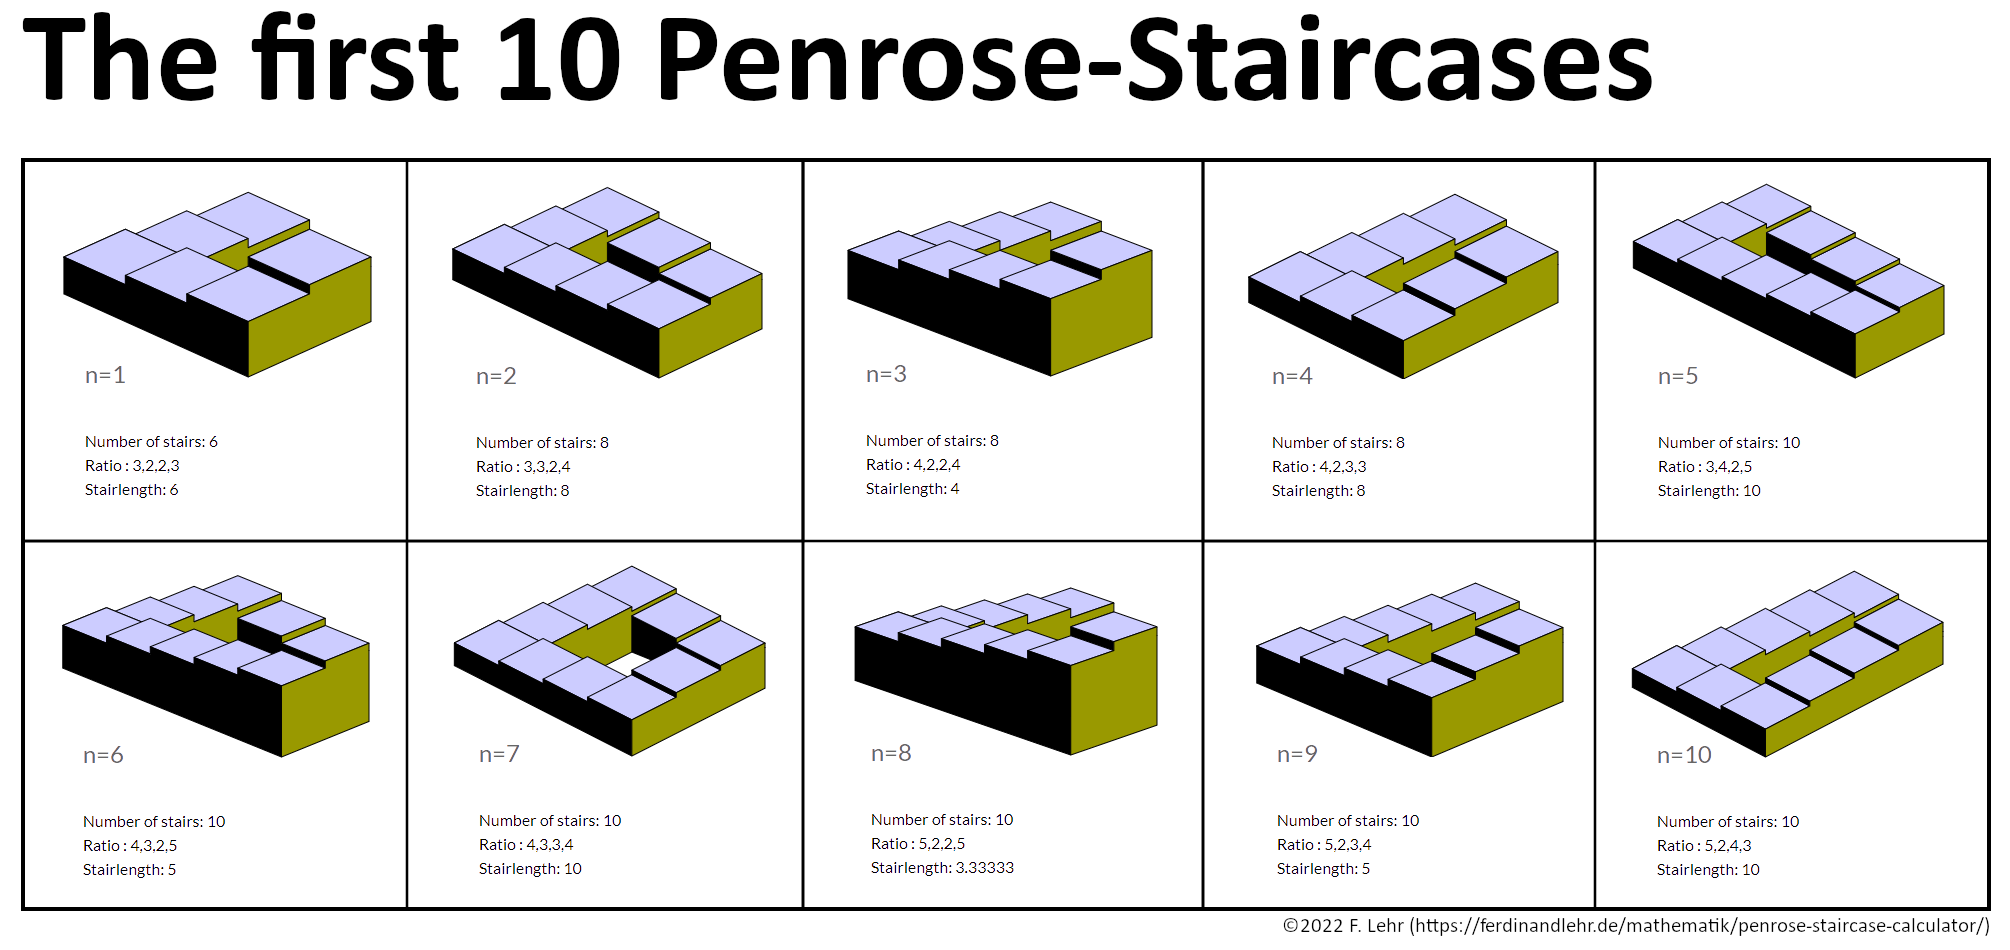 An image of first ten algorithmic-generated Penrose-Staircases